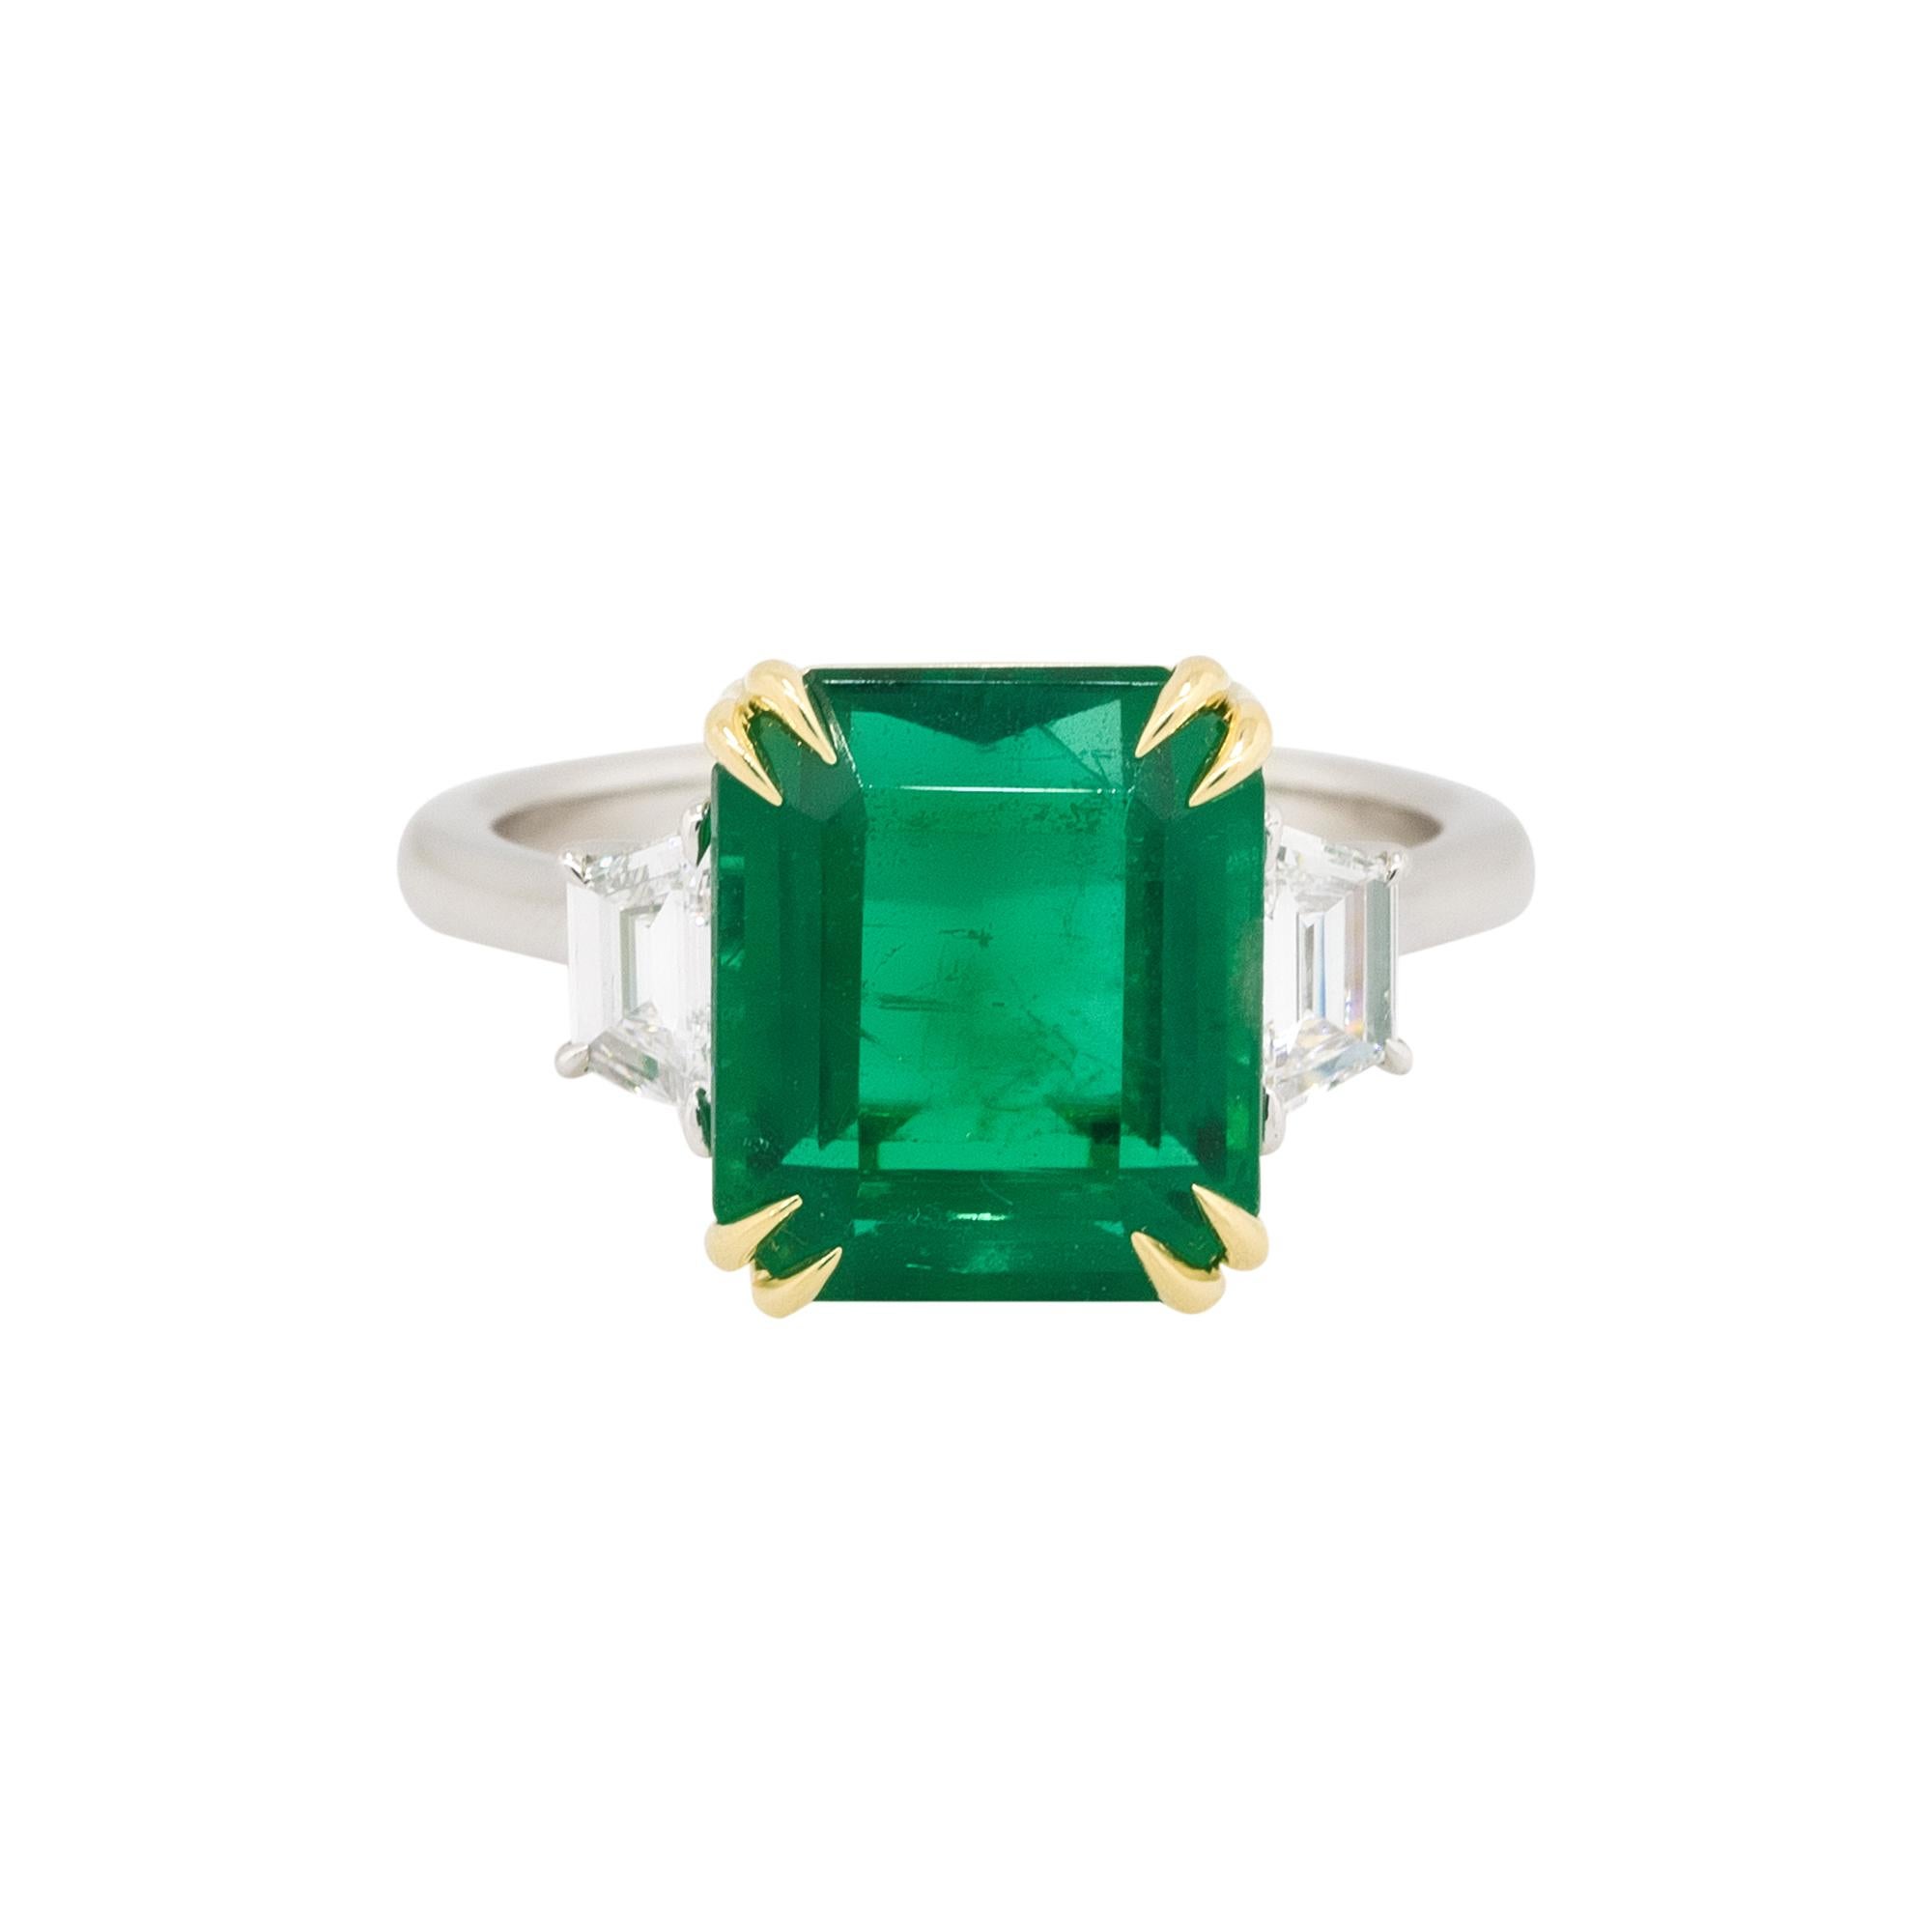 Material: Platinum & 18k yellow gold
Diamond Details: Approx. 48ctw of trapezoid shaped Diamonds. Diamonds are G/H in color and VS in clarity
Gemstone Details: Approx. 6.16ctw Emerald center gemstone
Ring Size: 6
Total Weight: 7.1g